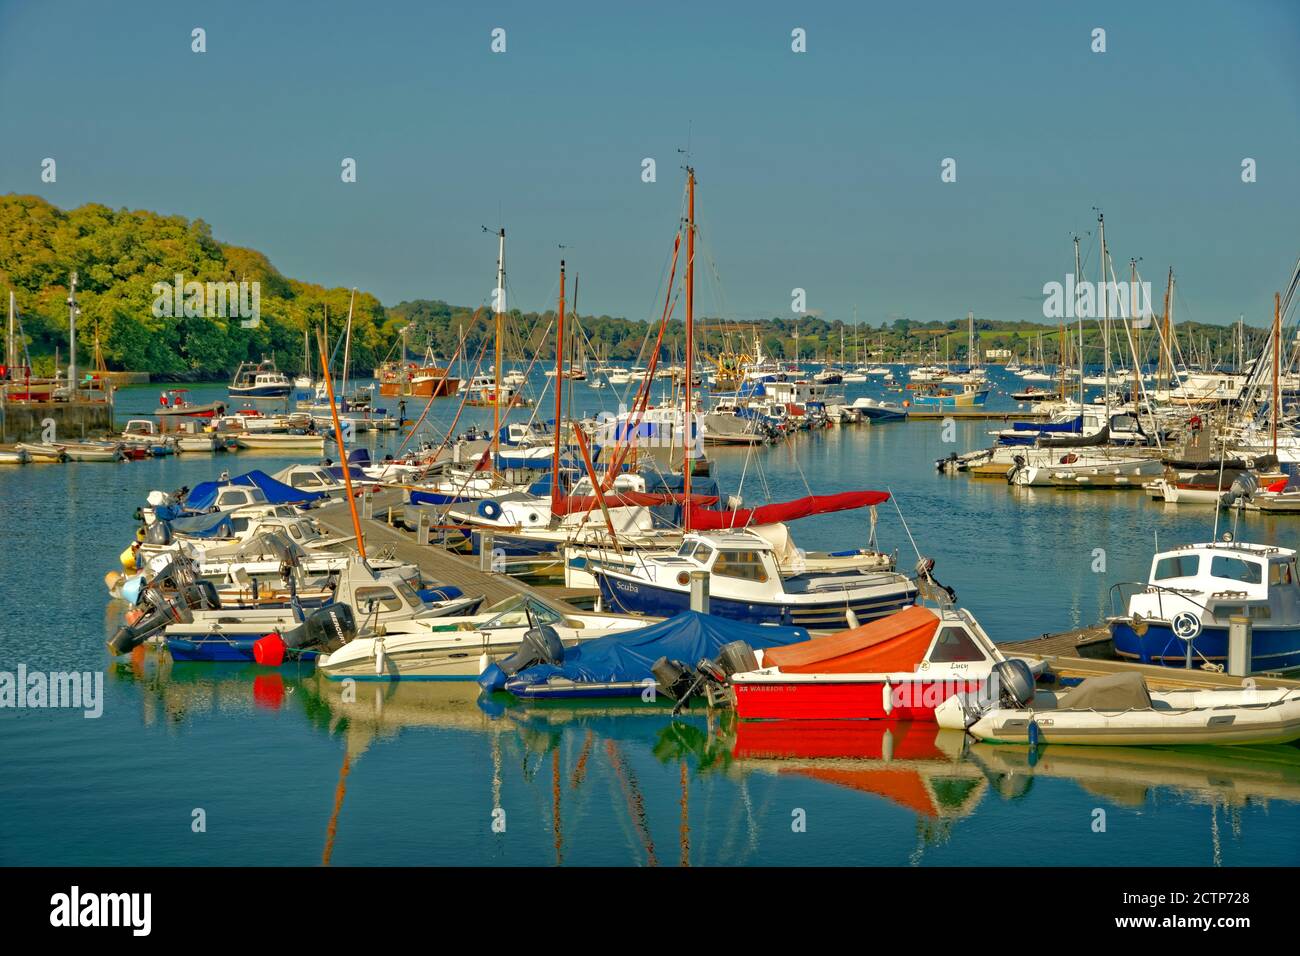 Boat moorings at Mylor Church on the Carrick Roads near Falmouth, Cornwall, England. Stock Photo